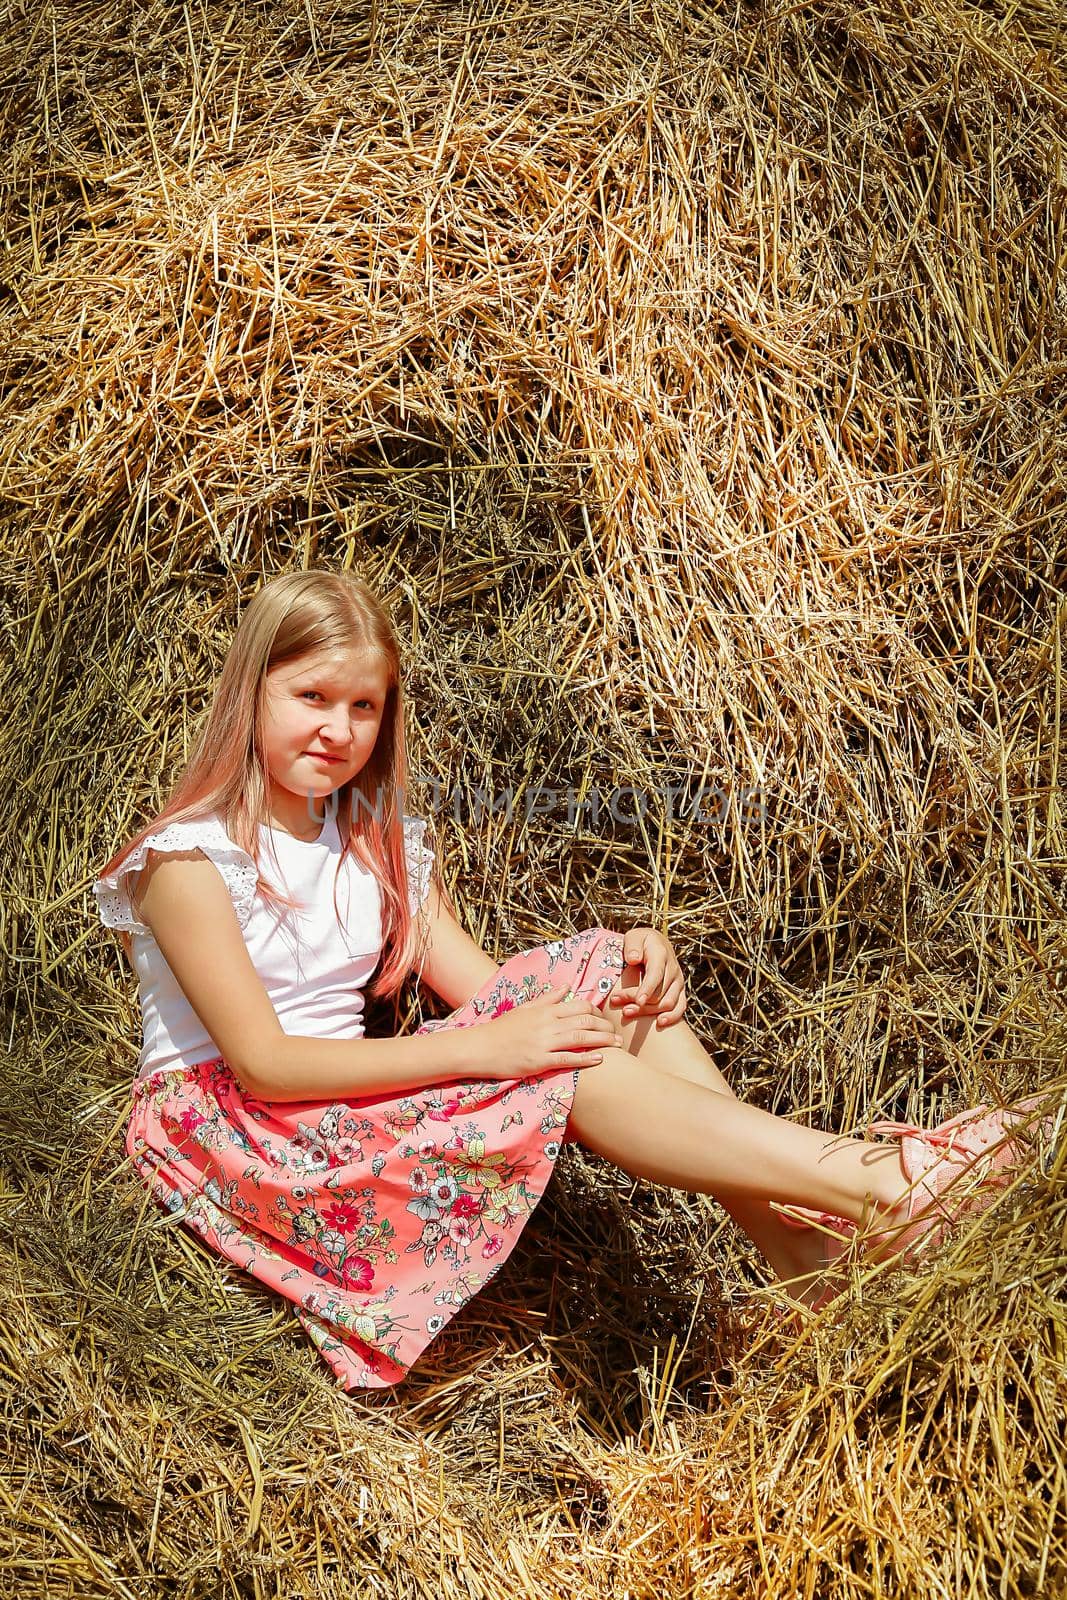 A schoolgirl girl with long blonde hair sits in a pink dress on a bale of straw on a summer day